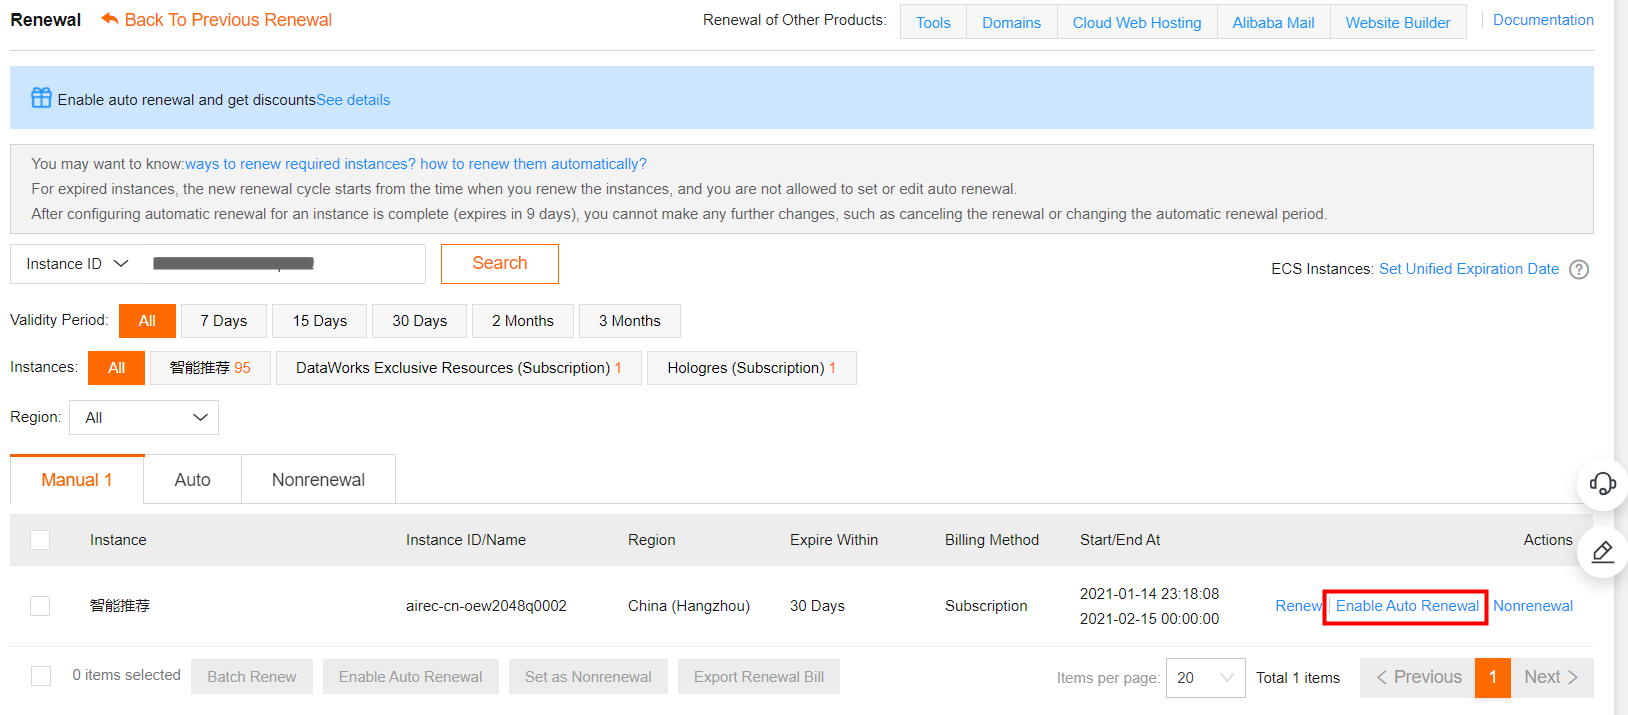 Enable auto-renewal after you purchase an AIRec instance